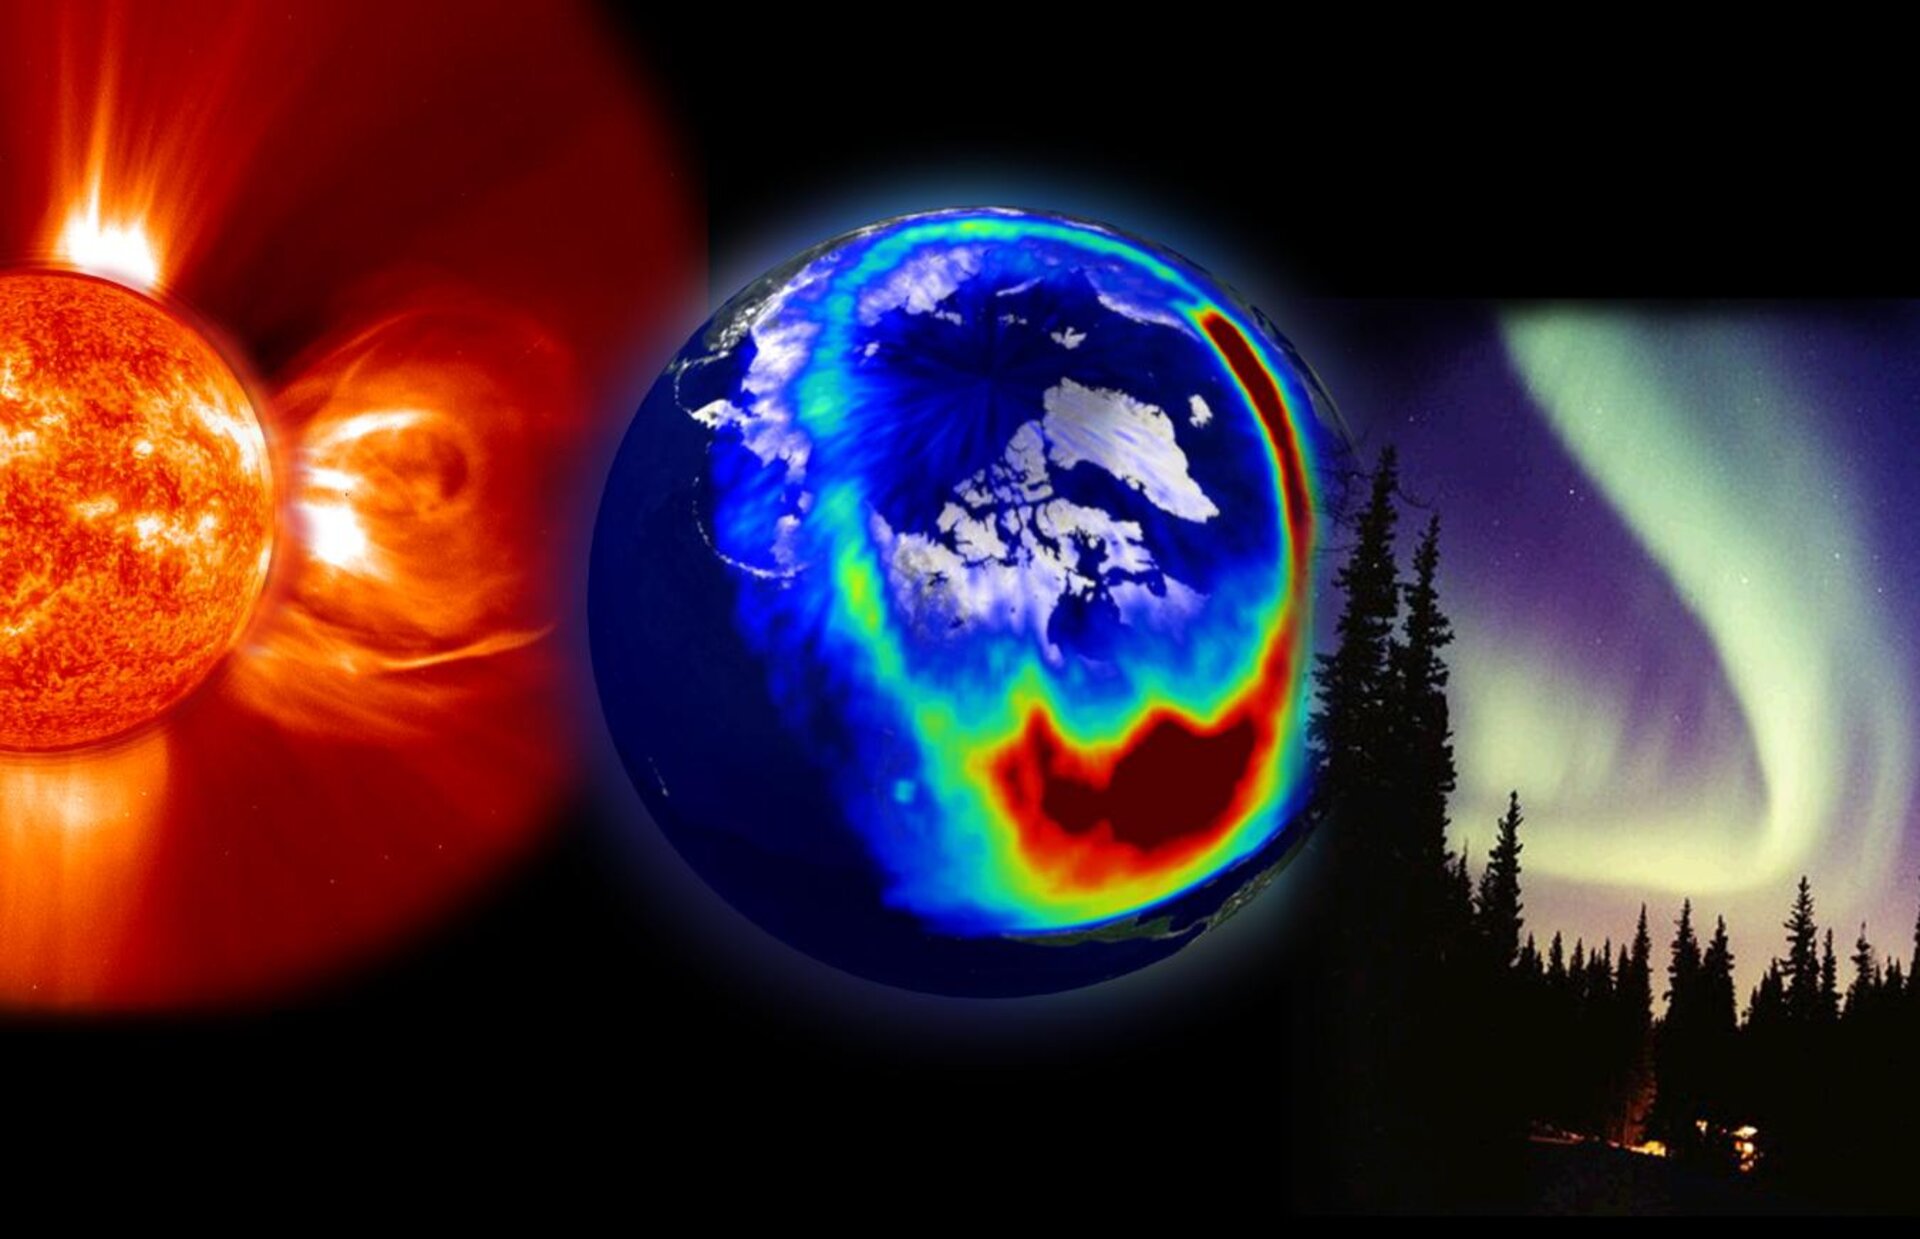 Space weather includes understanding the Sun-Earth connection